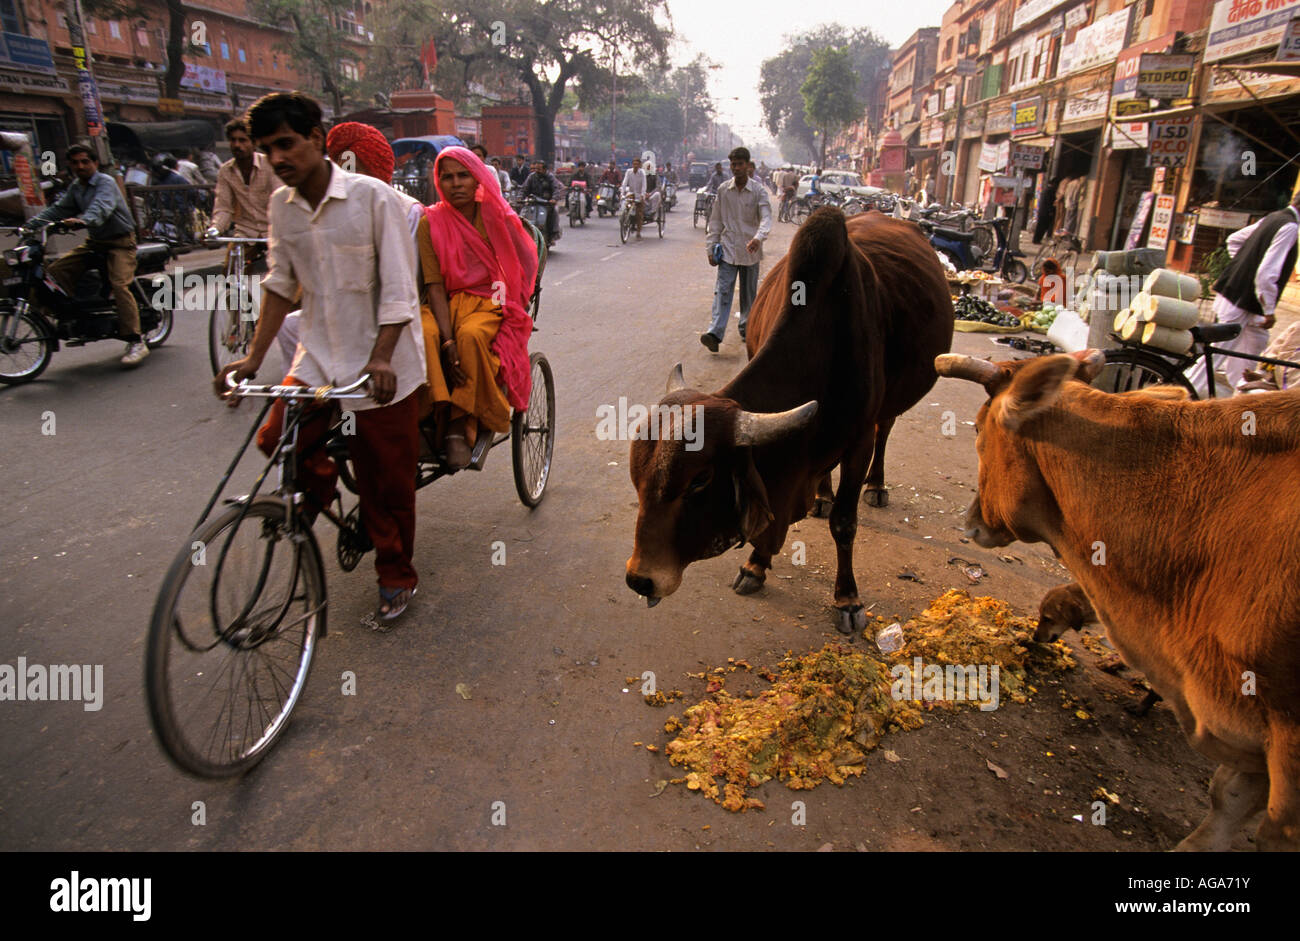 India, Jaipur, Rajasthan, Vehicles moving beside cows on street Stock Photo